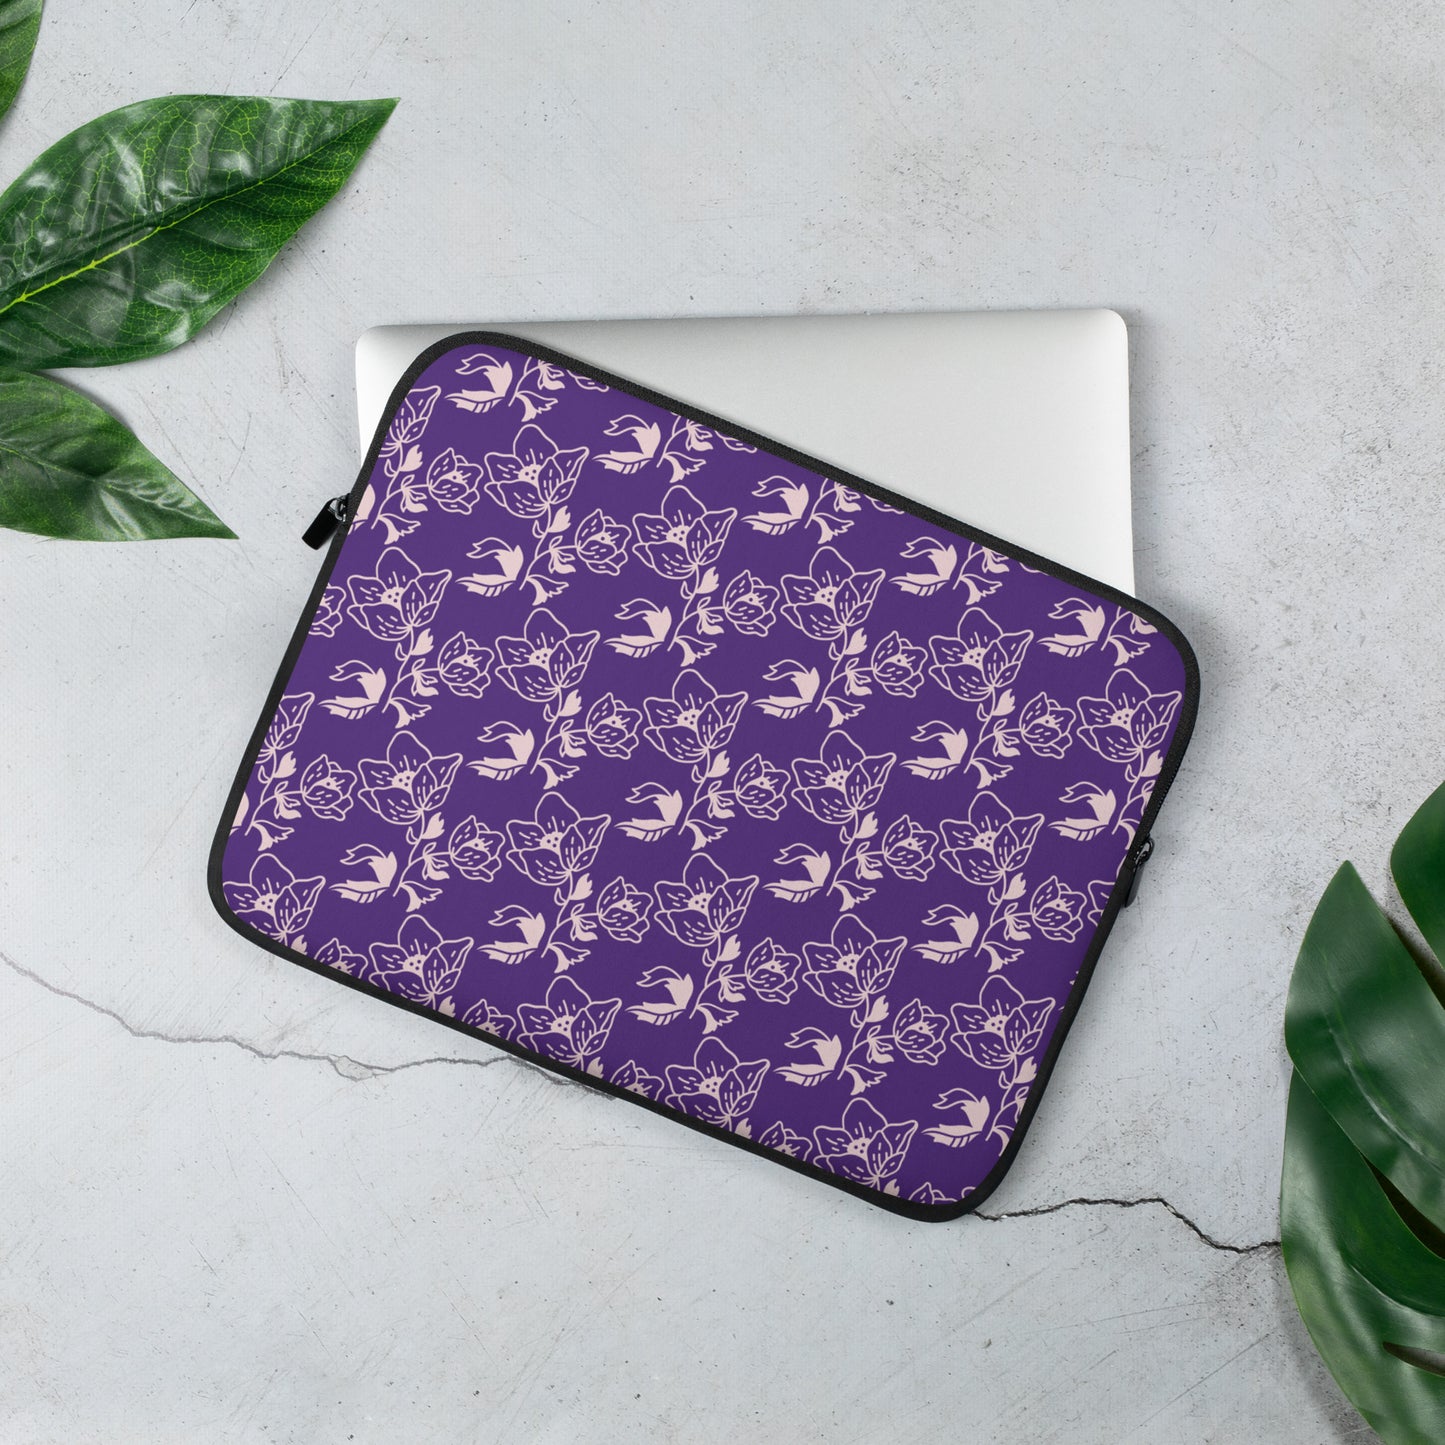 High Quality Laptop Sleeve, 13" and 15" sleeves